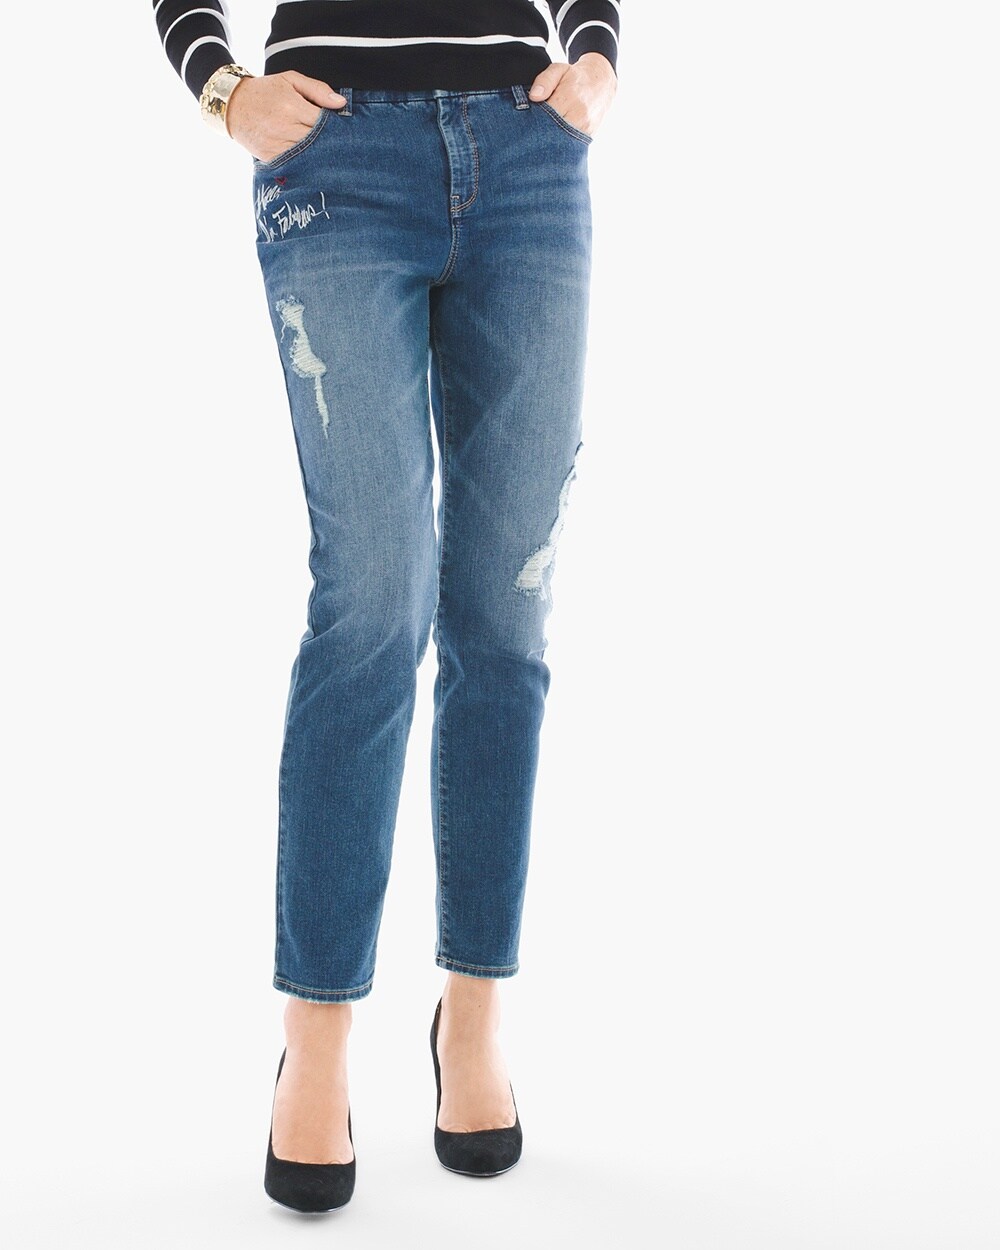 So Slimming Conversational Girlfriend Ankle Jeans